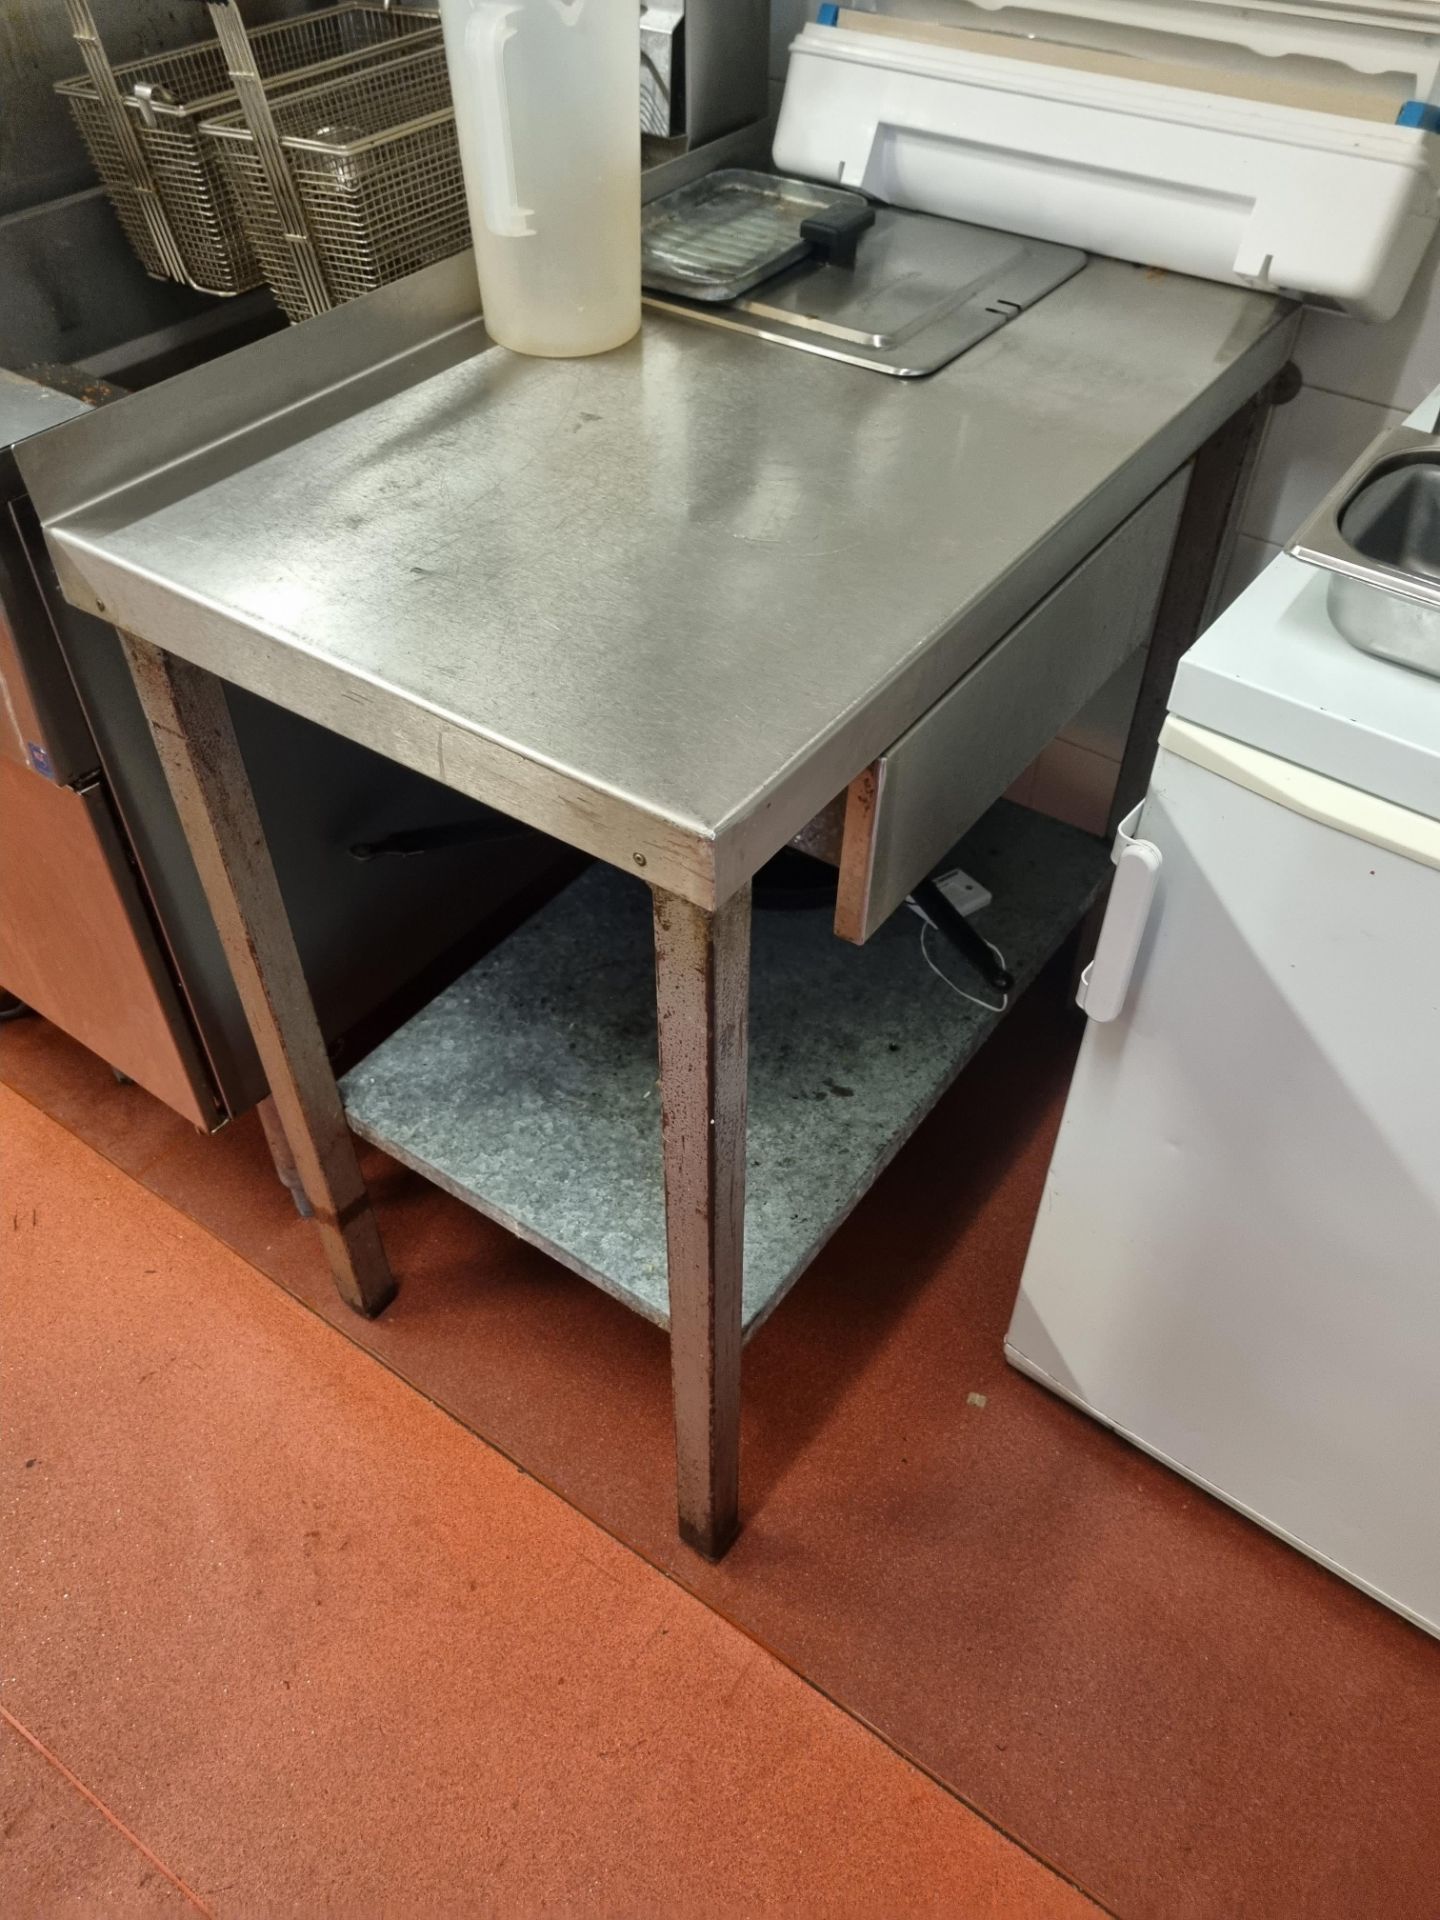 Stainless Steel Topped Table With Drawer, Backsplash and Undershelf W 820mmD 500mm H 860mm